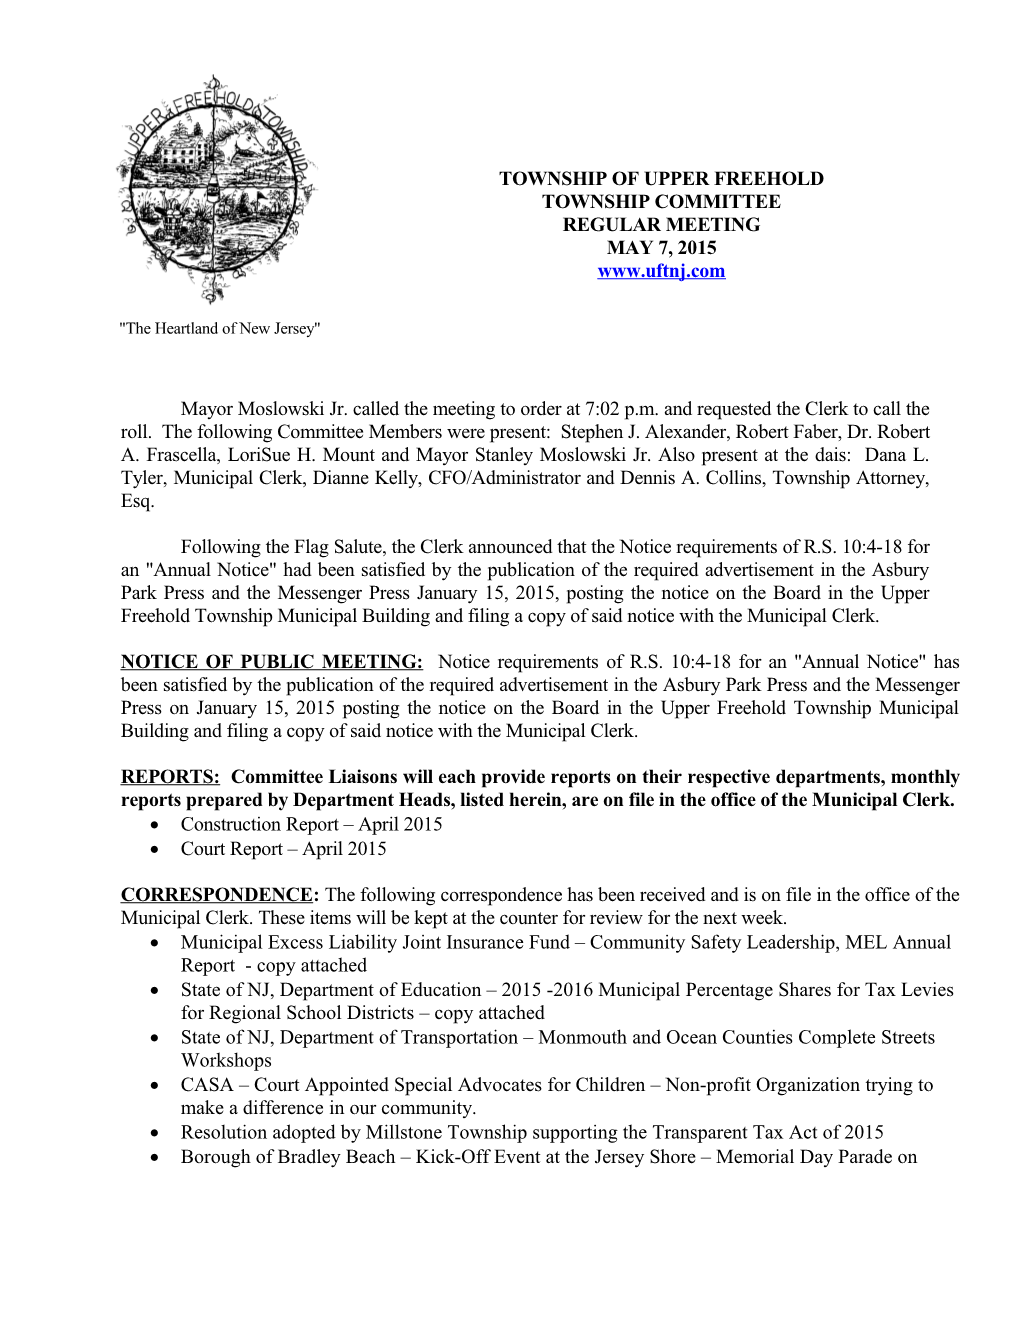 Upper Freehold Township Committee Regular Meeting May 7, 2015